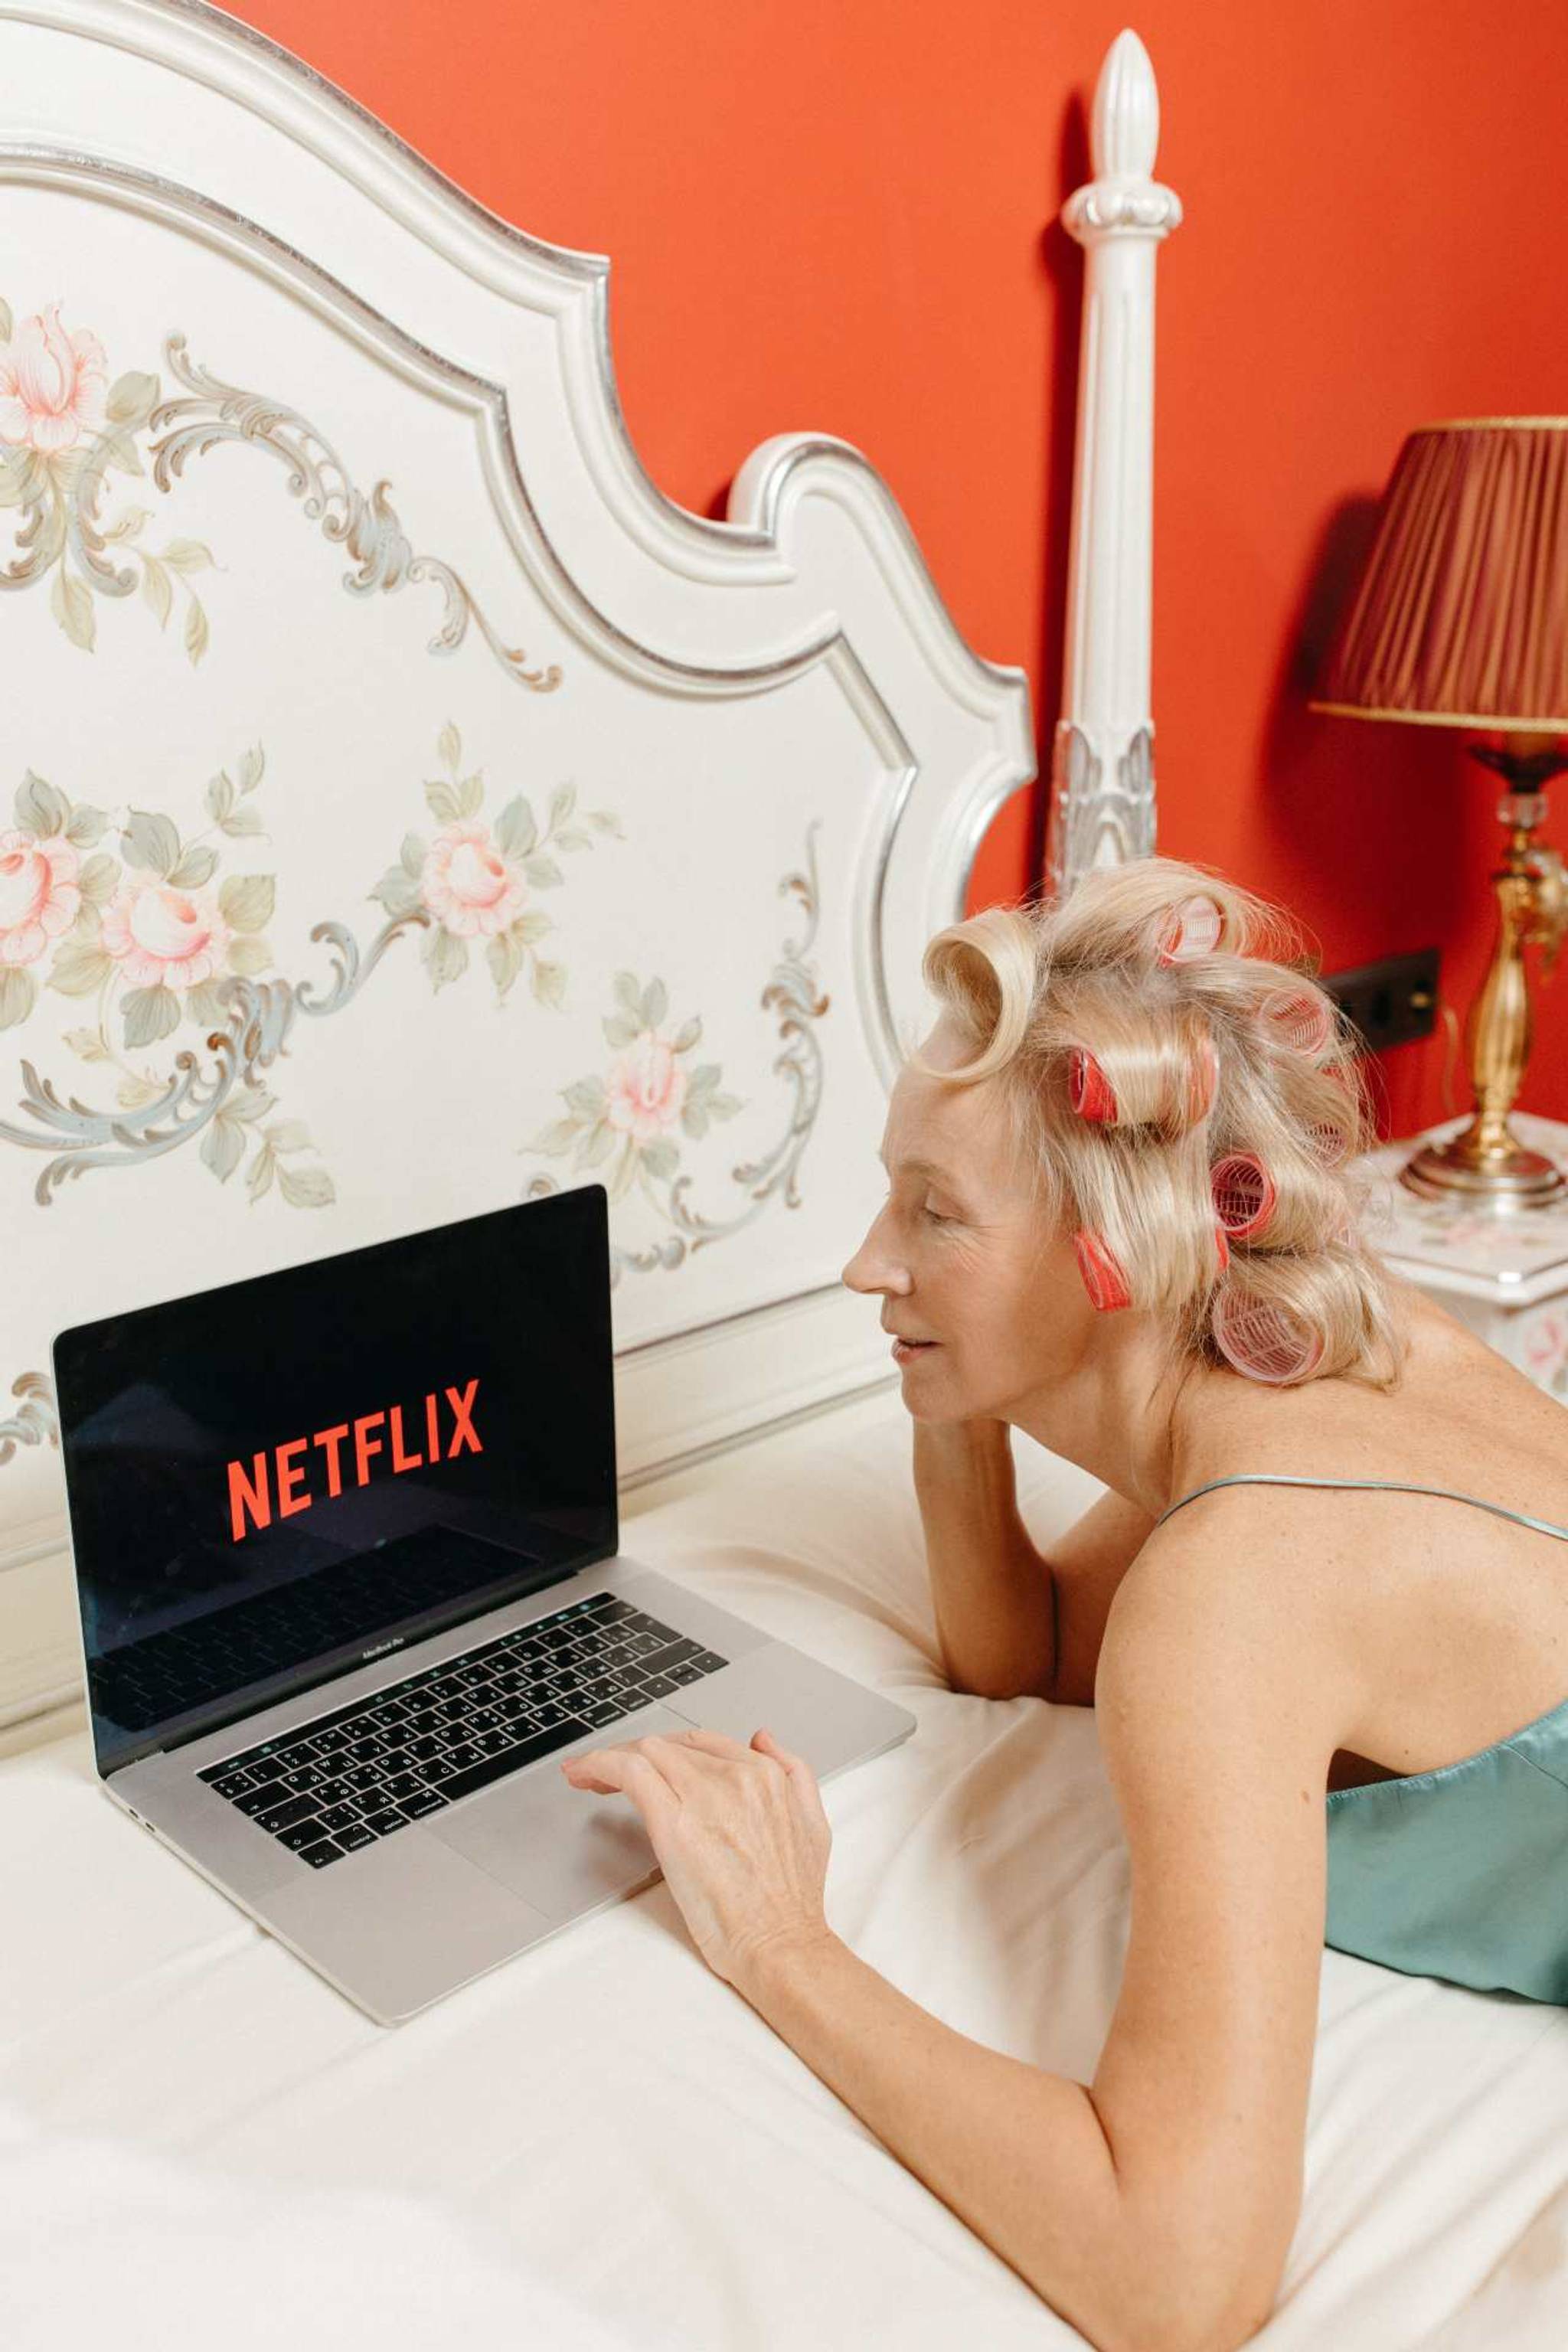 Netflix seeks to tap silver streamers as key cohort